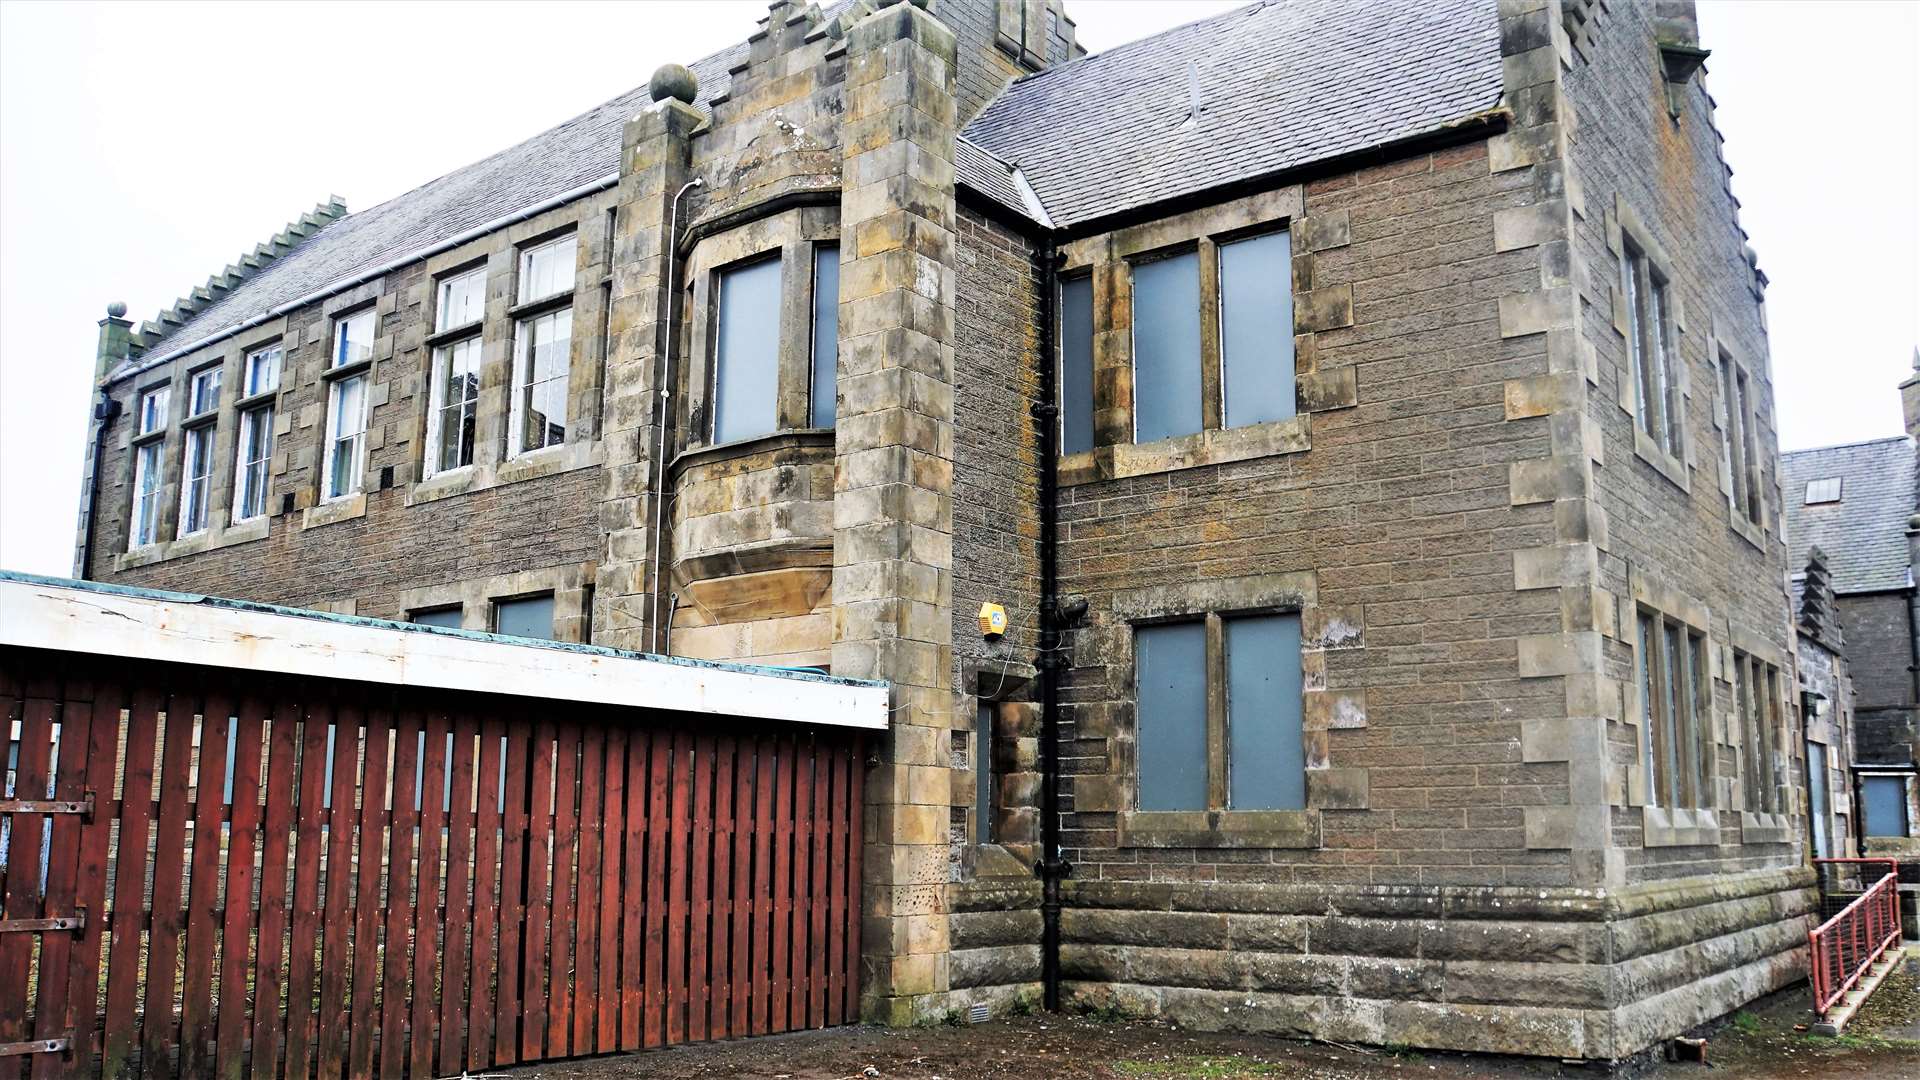 The former school opened in August 1911 and was considered to be the most up to date educational establishment in the north of Scotland at that time. Picture: DGS